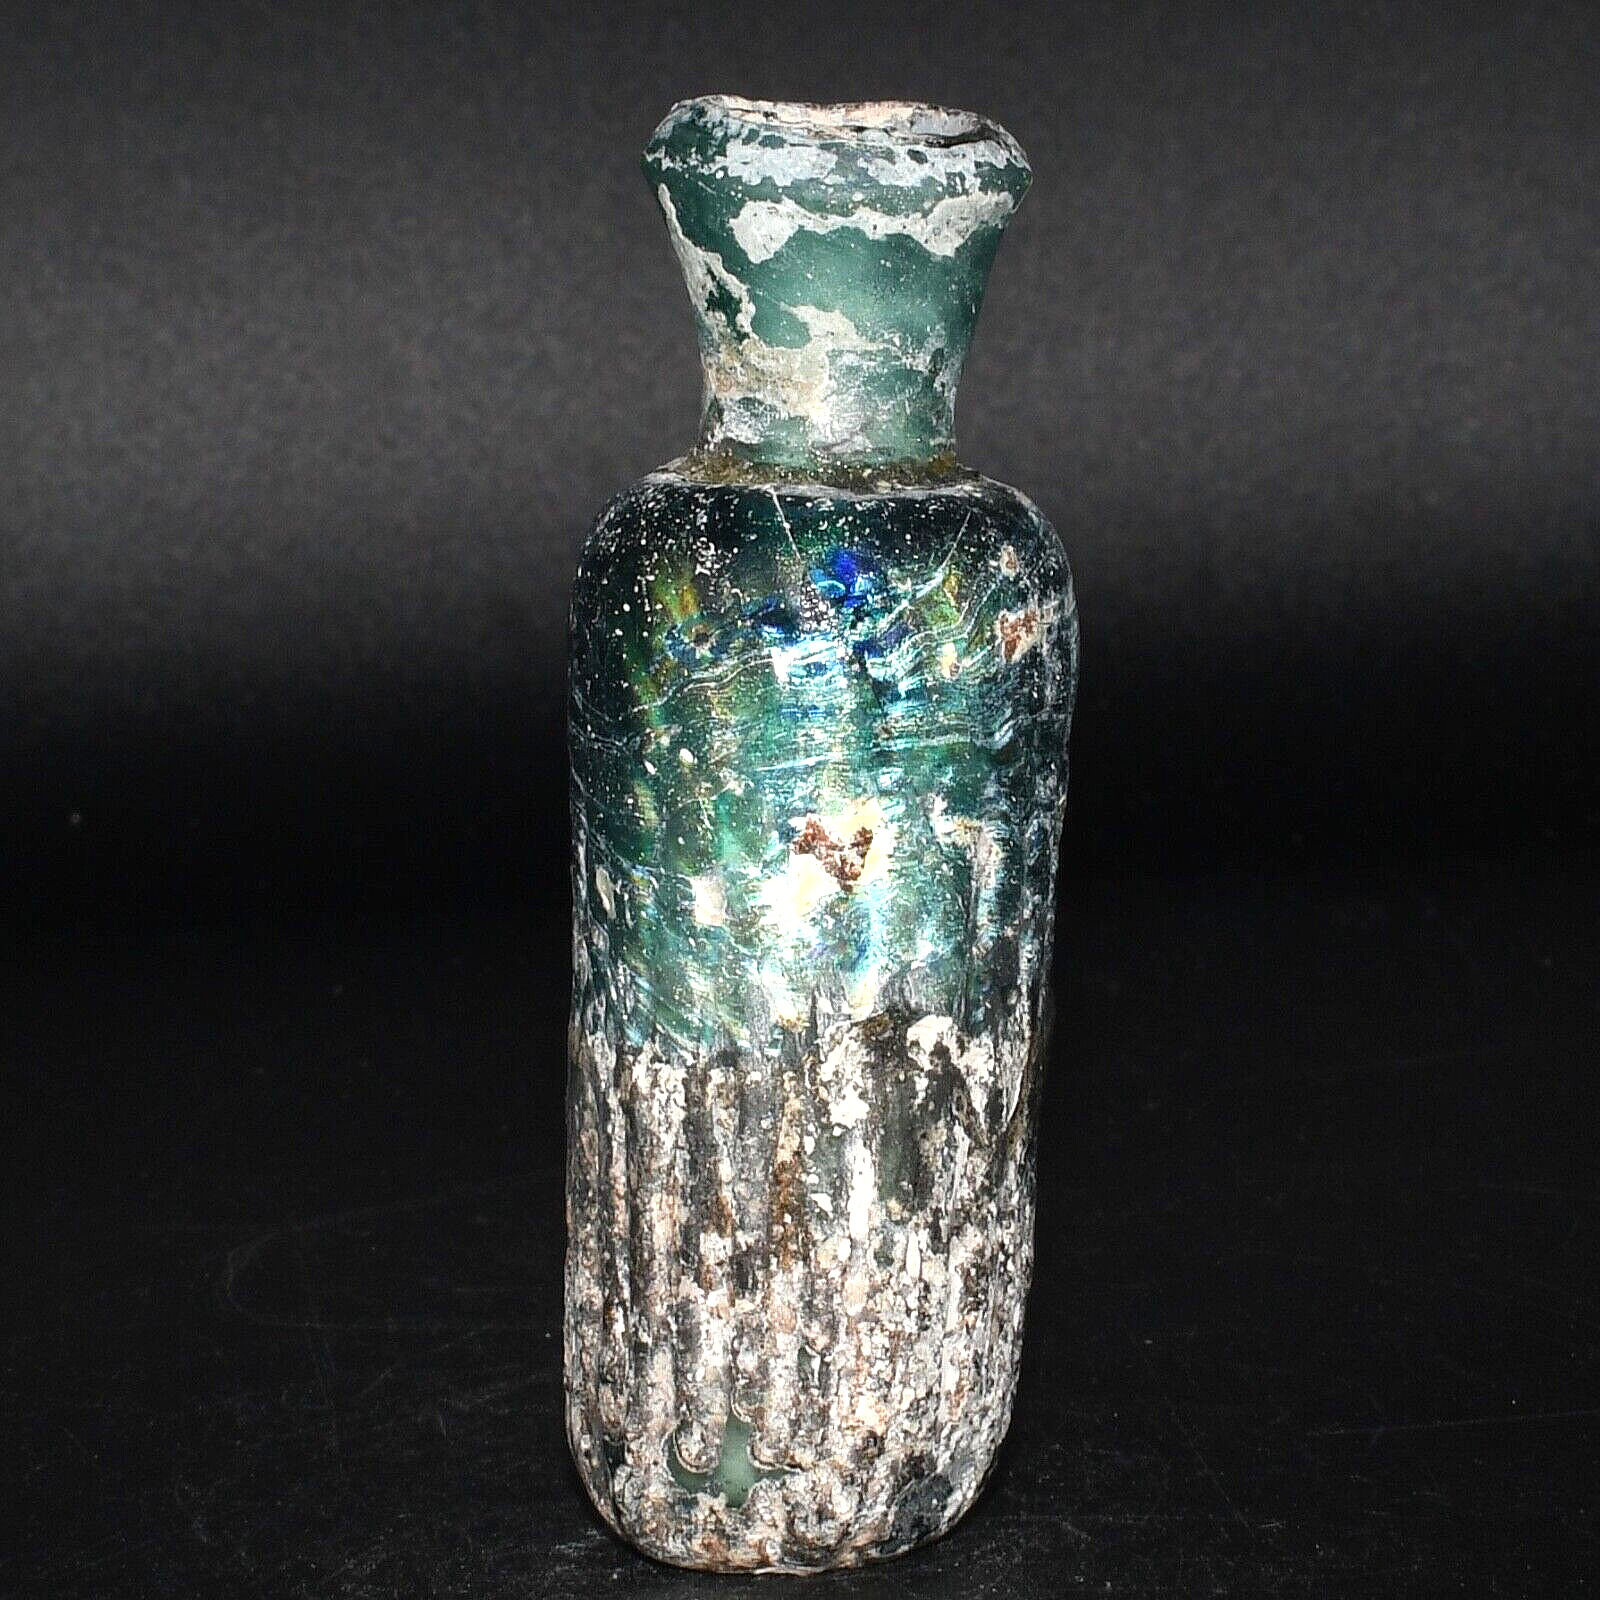 Genuine Ancient Roman Glass Medical Bottle with Blue Iridescent Patina